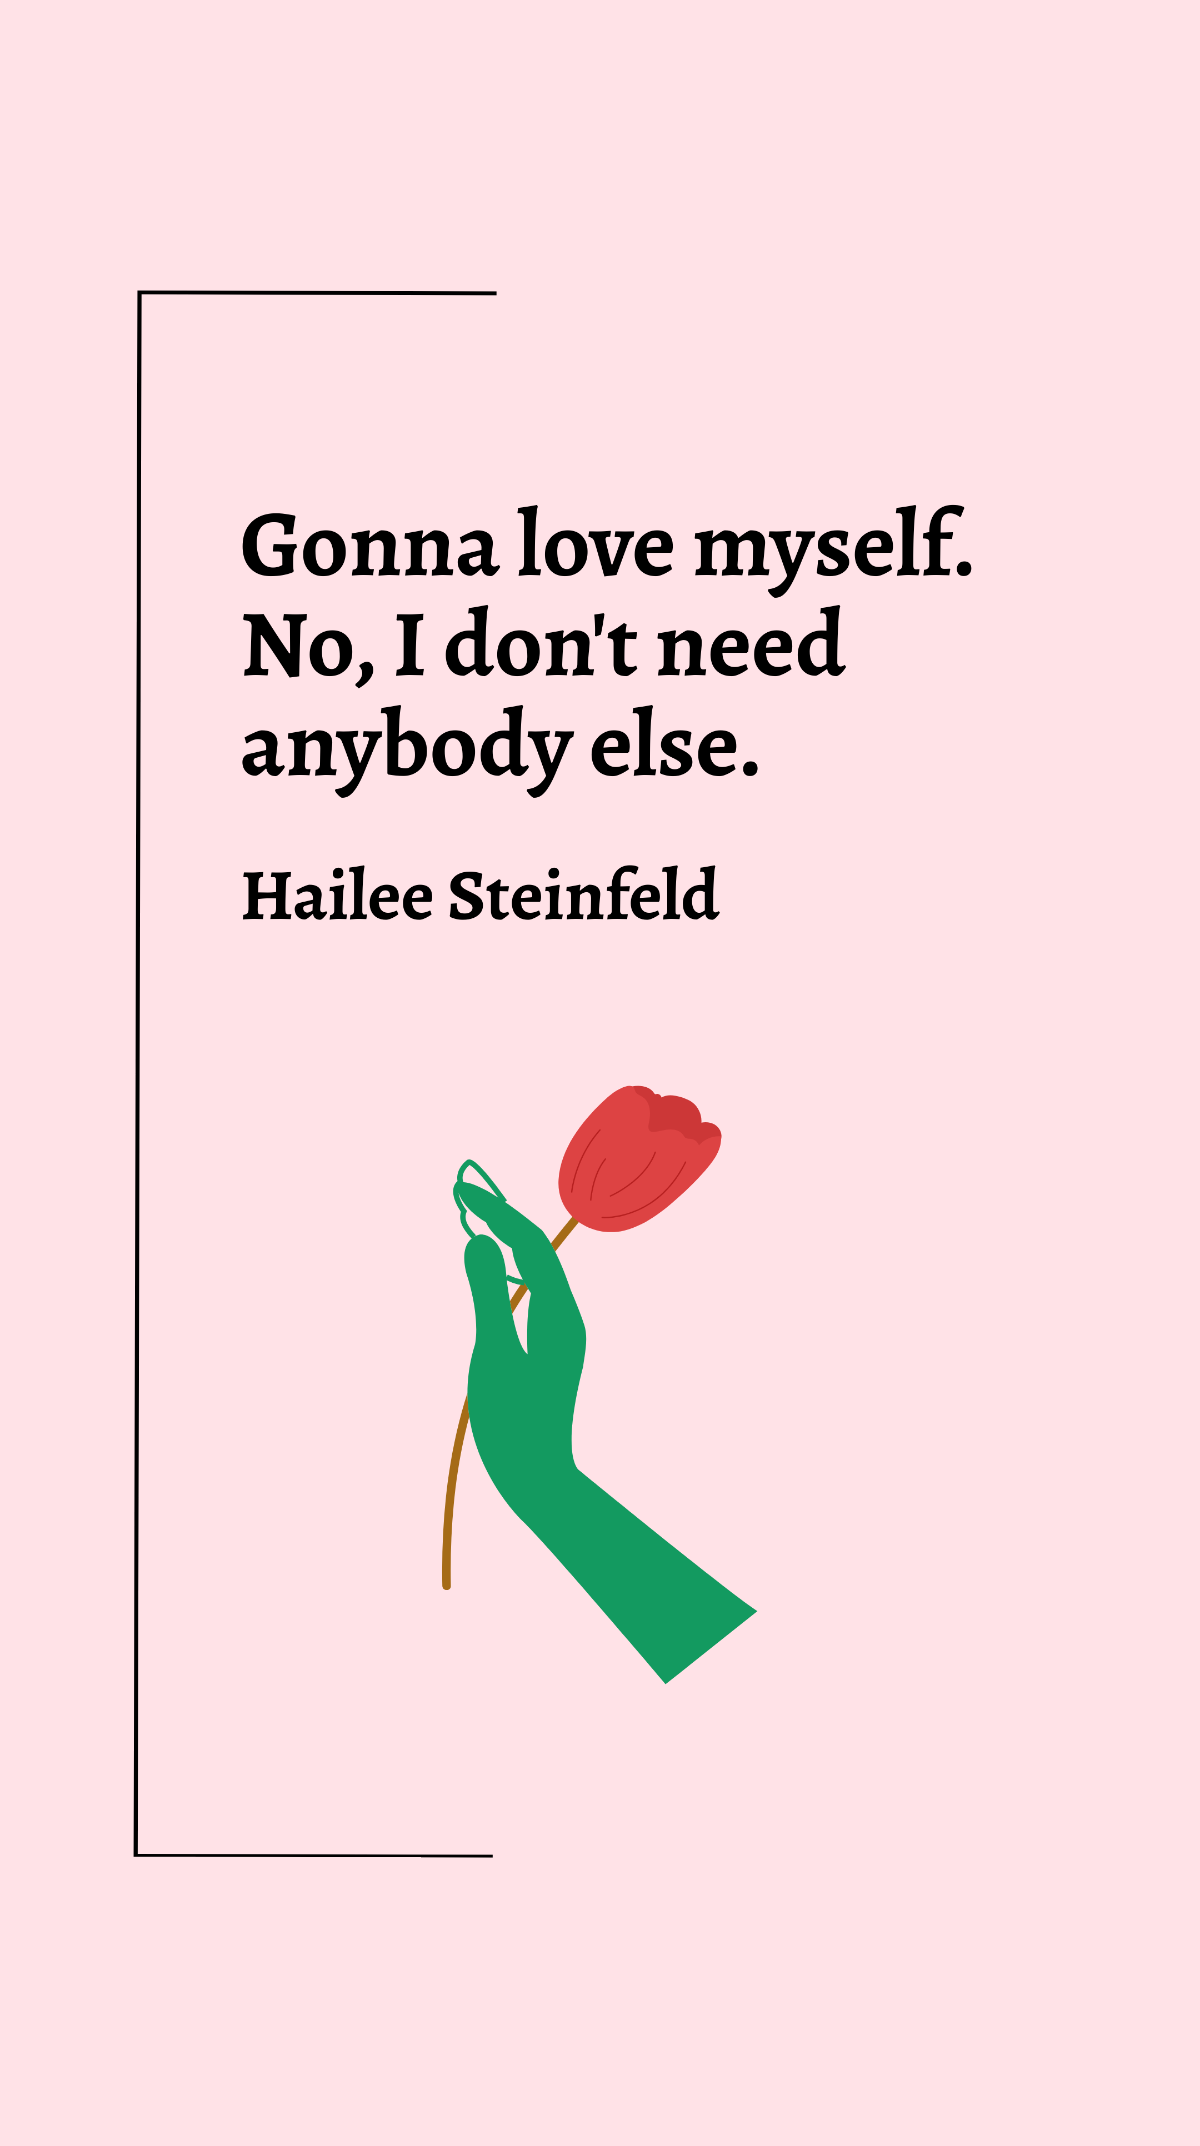 Hailee Steinfeld - Gonna love myself. No, I don't need anybody else. Template